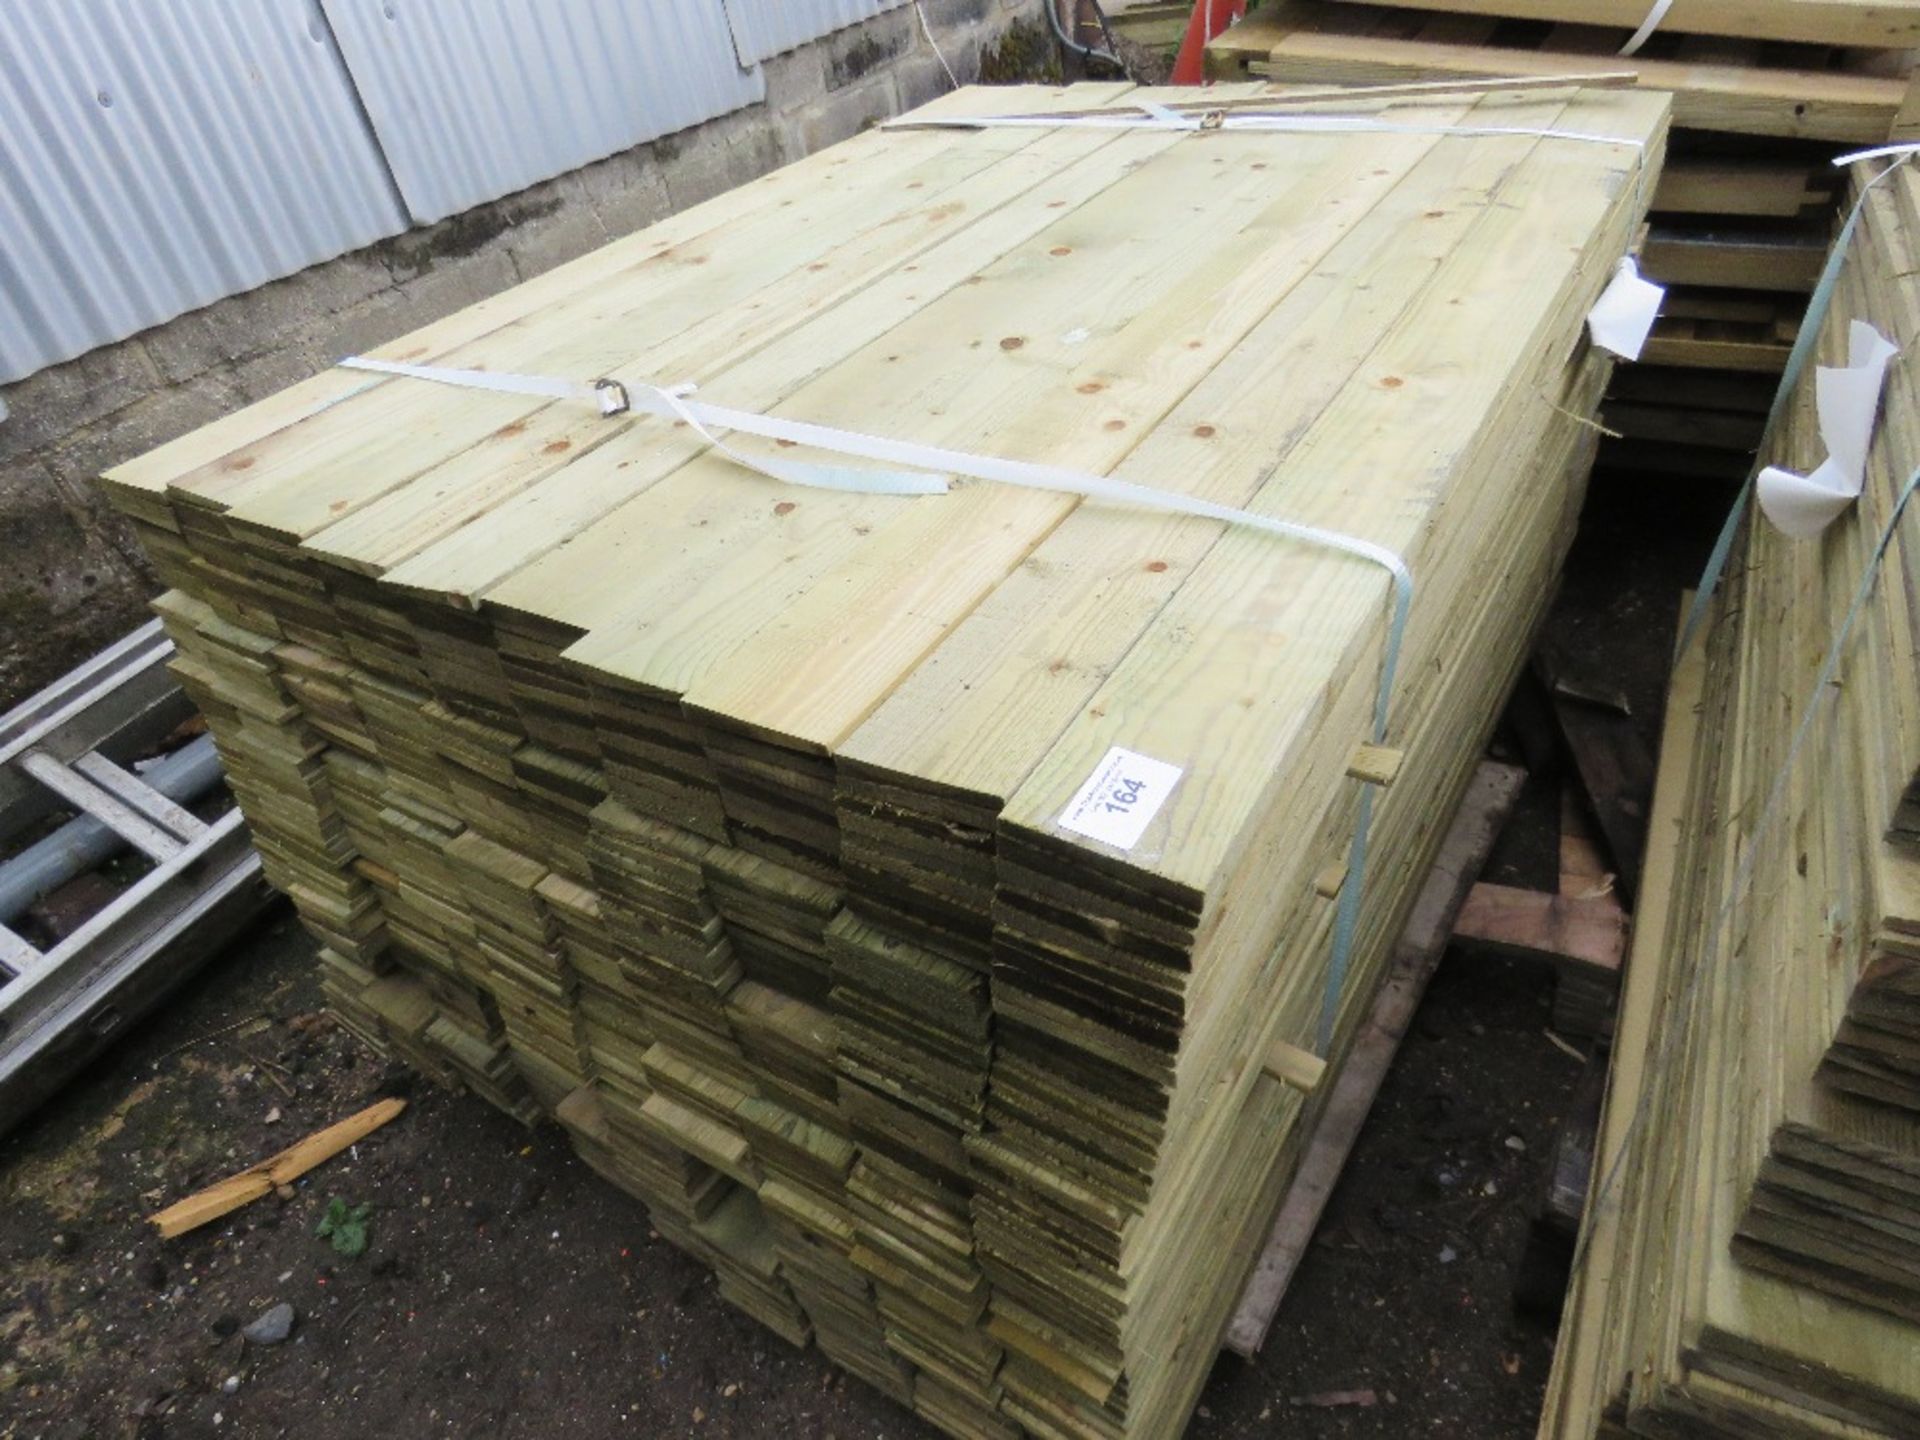 1X PACK OF FEATHER EDGE TIMBER CLADDING, 1.5M LENGTH X 10CM WIDTH